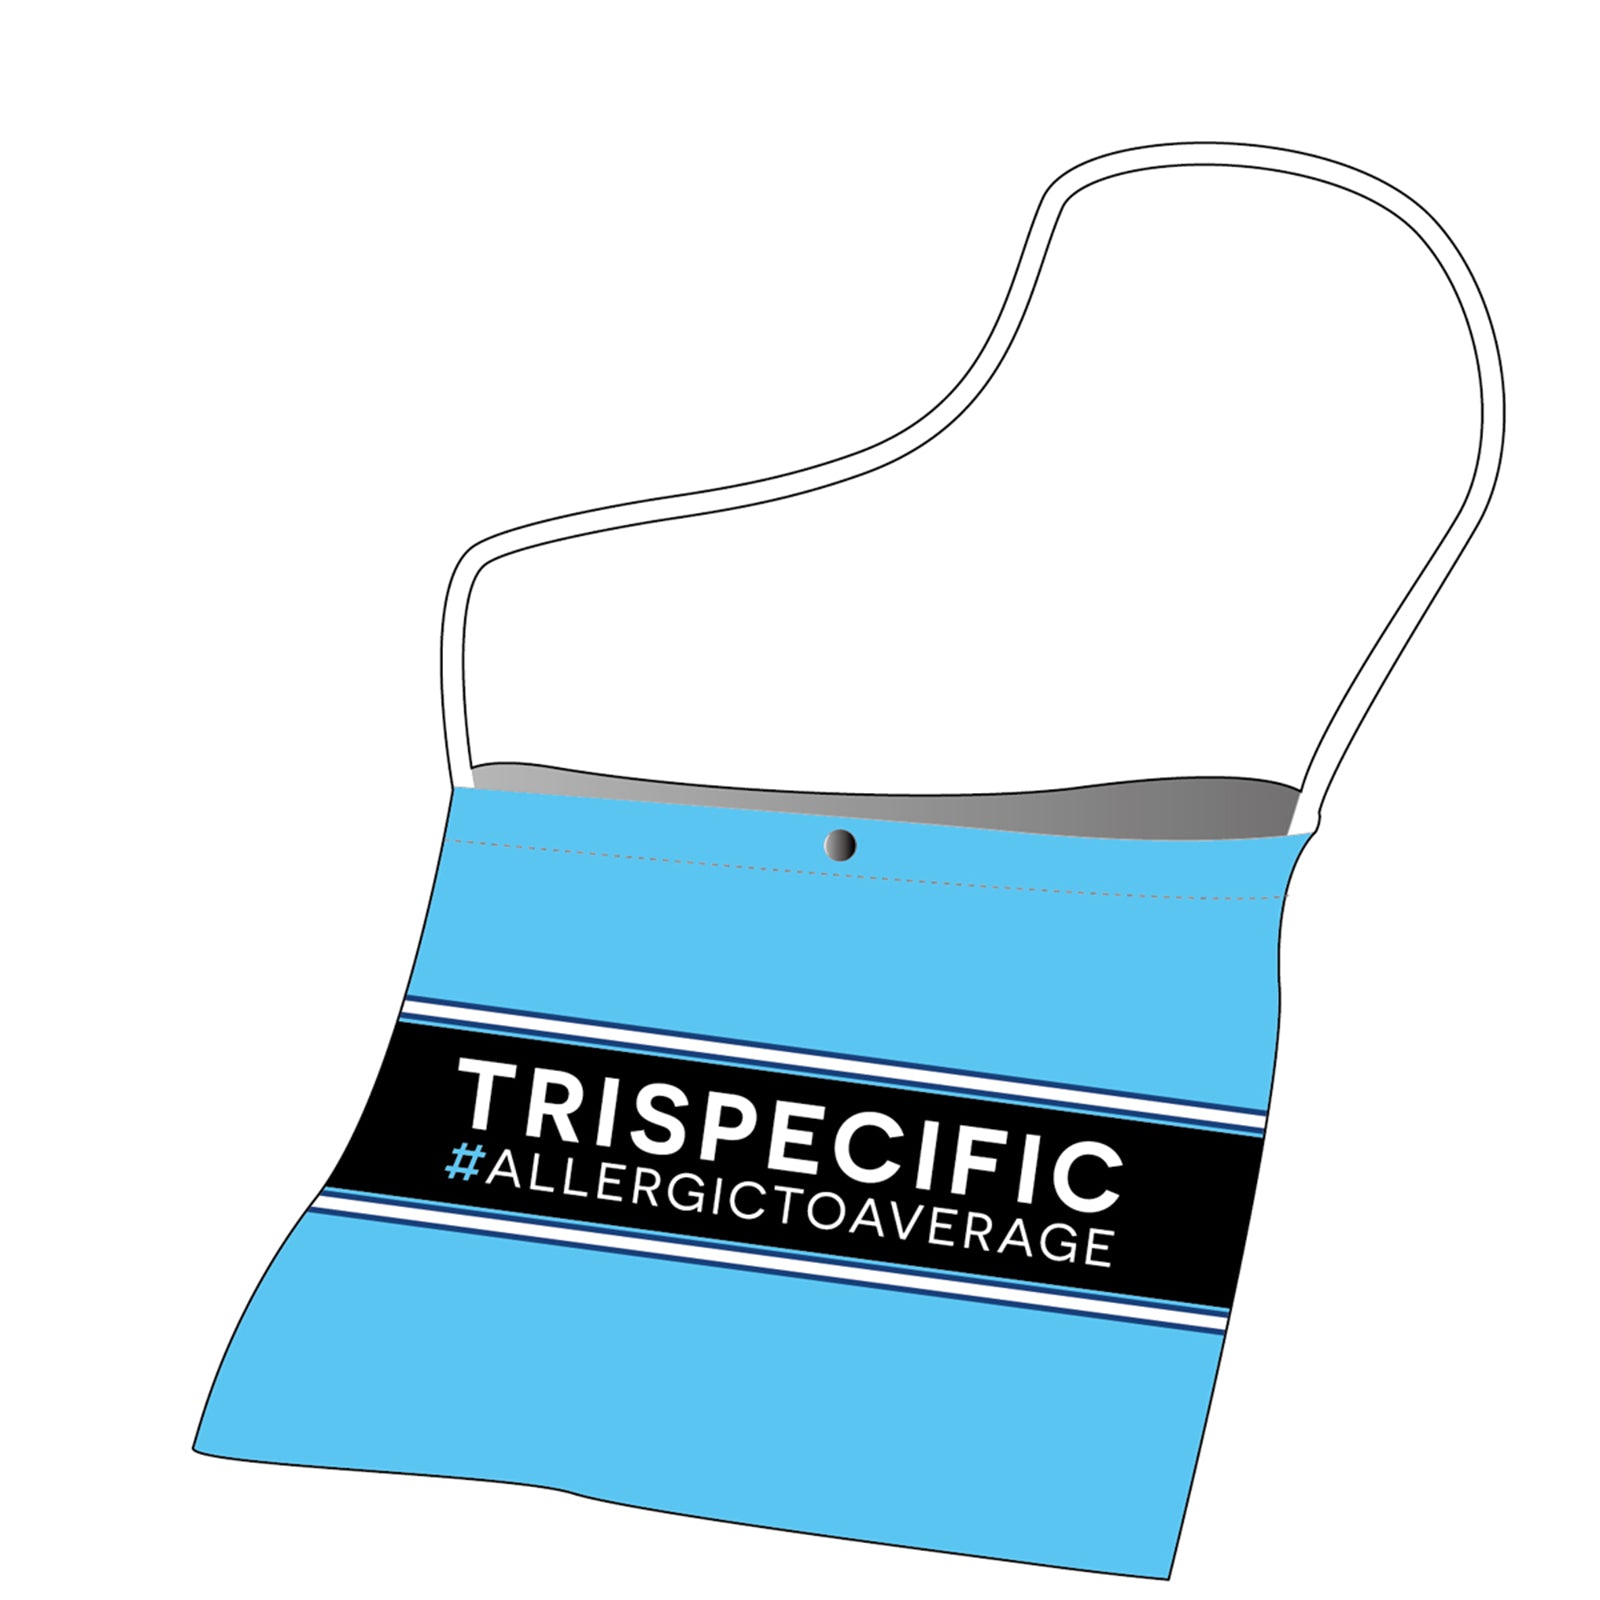 TRISPECIFIC SILVER Cycling Musette Bag